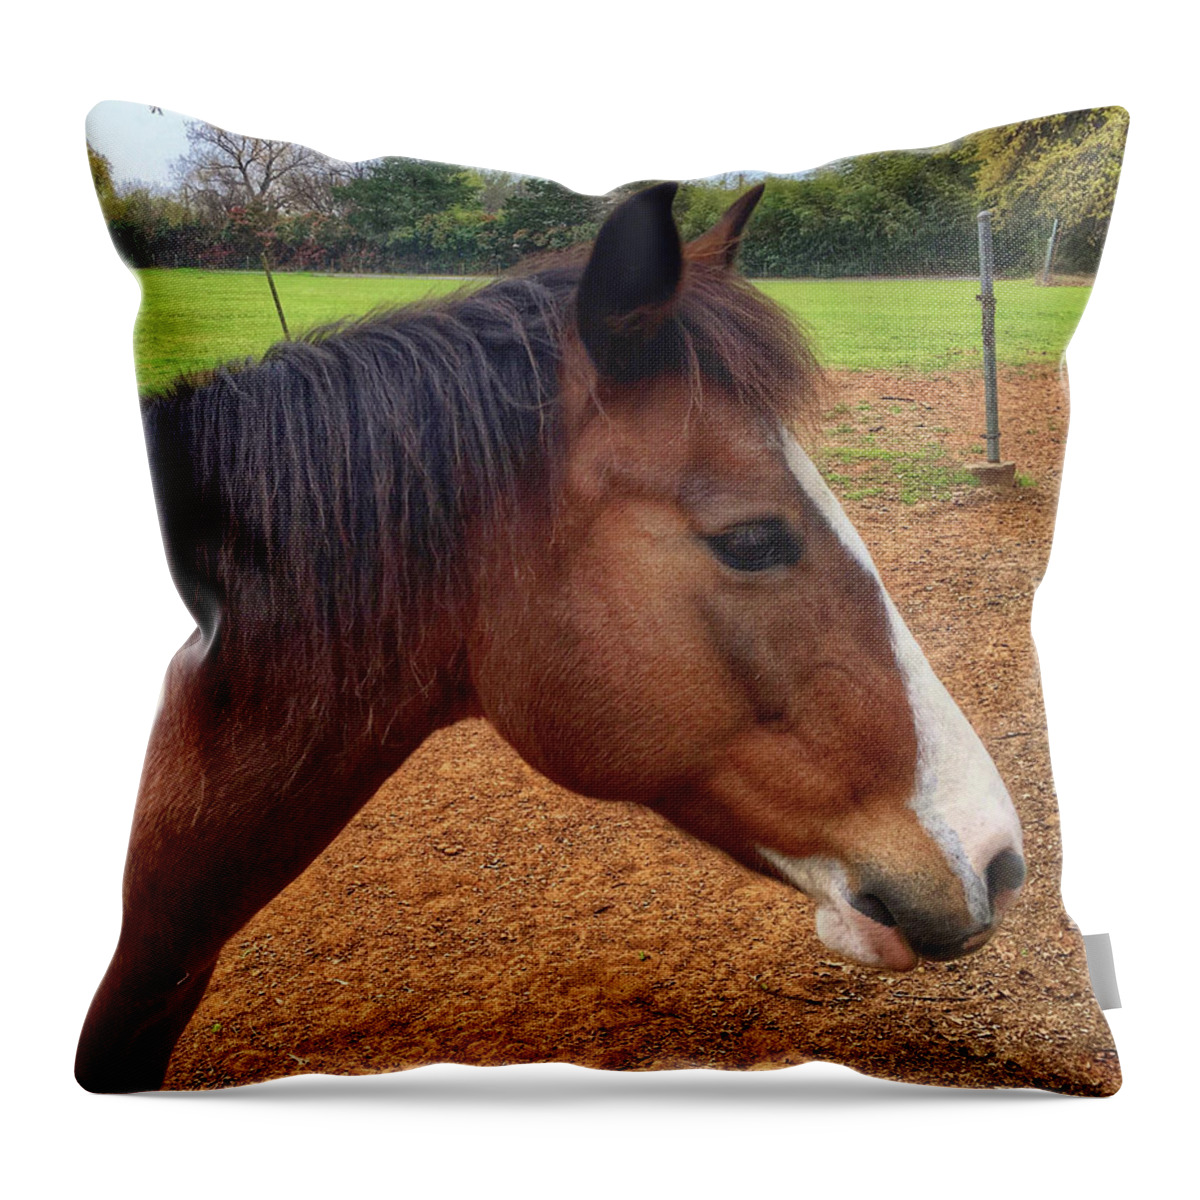 Horse Throw Pillow featuring the photograph Paint Profile by Doris Aguirre